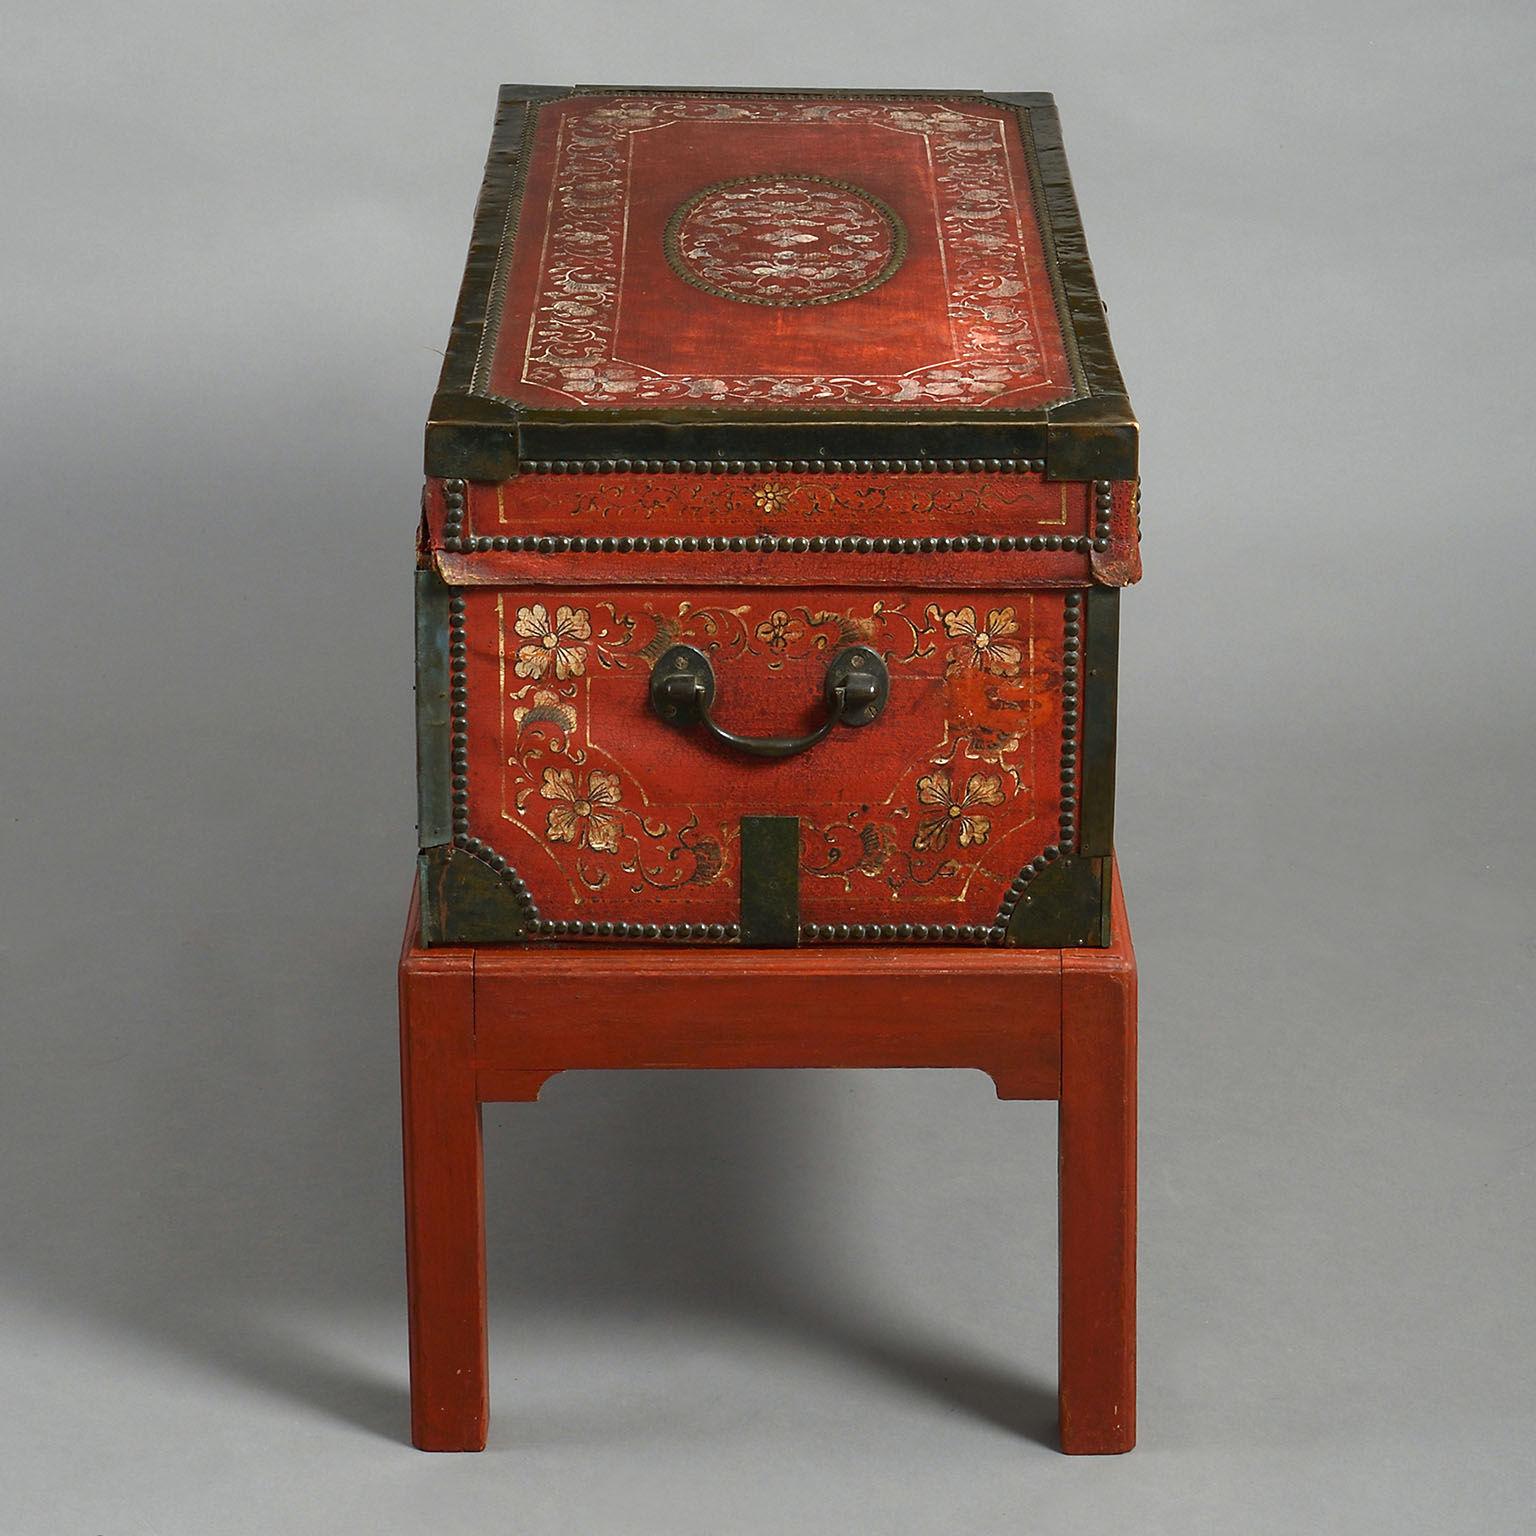 Late 18th Century 18th Century Chinese Export Painted Leather Trunk For Sale